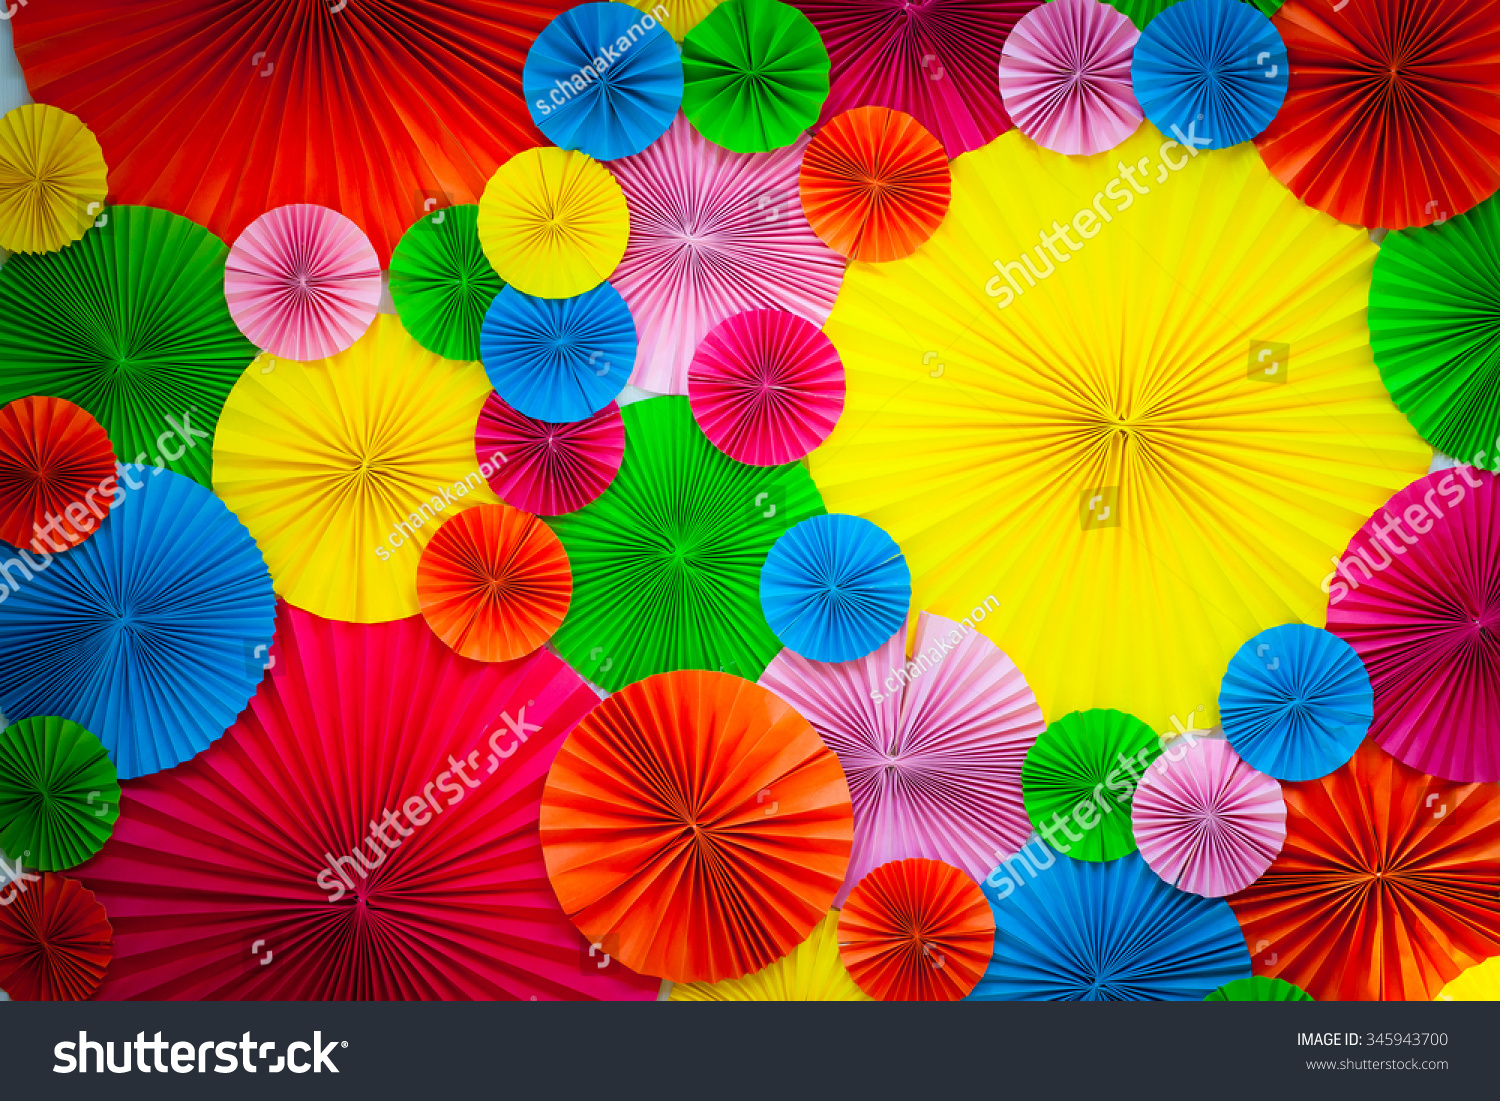 Colorful paper background #345943700